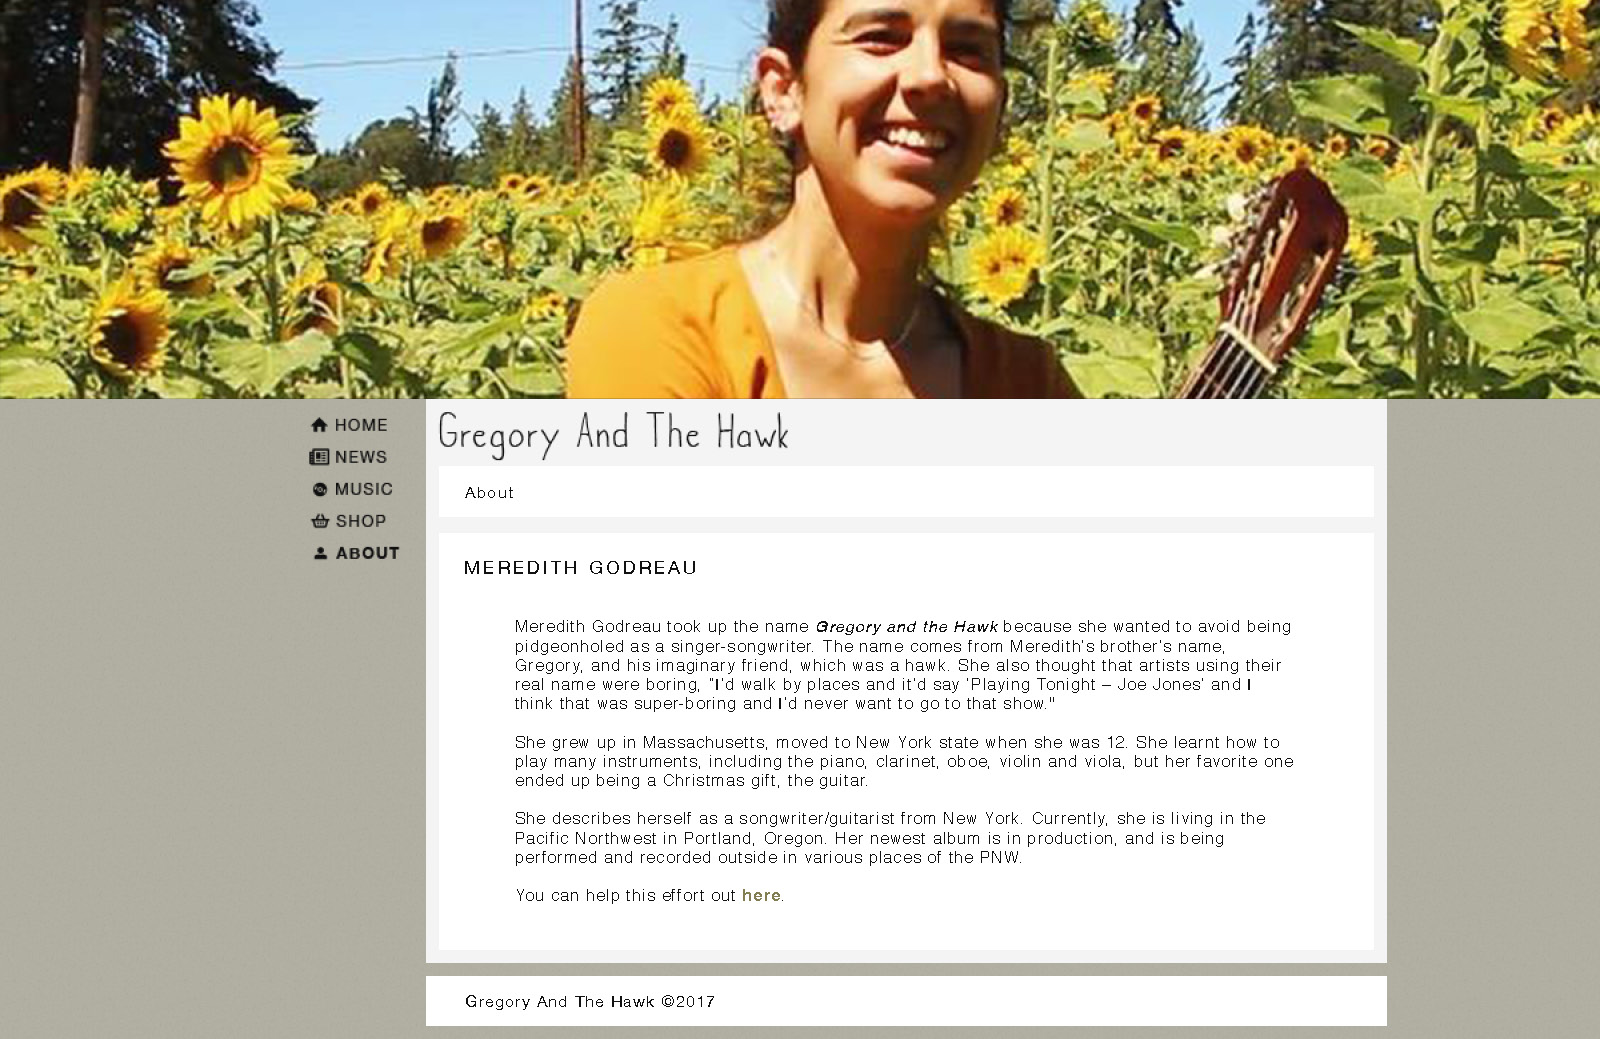 This is the about page for the Gregory and the Hawk website. It follows the same format as the home page. The header image on this page is the artist smiling and holding her guitar surrounded by a field of sunflowers. The content of this page is a short biography of Meridith Godreau, the woman behind Gregory and the Hawk.